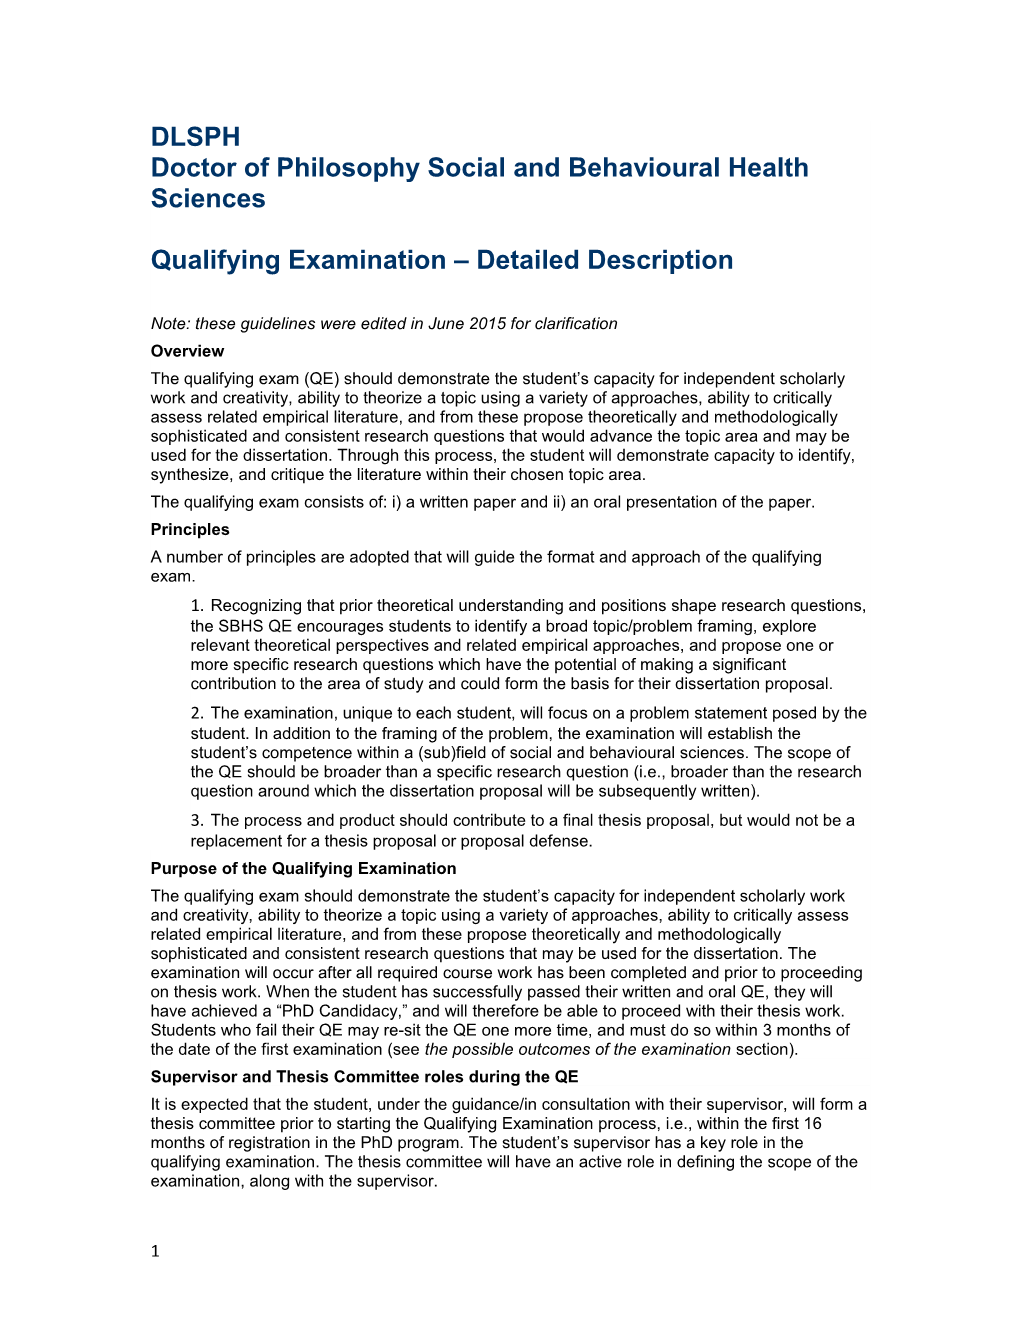 Doctor of Philosophy Social and Behavioural Health Sciences